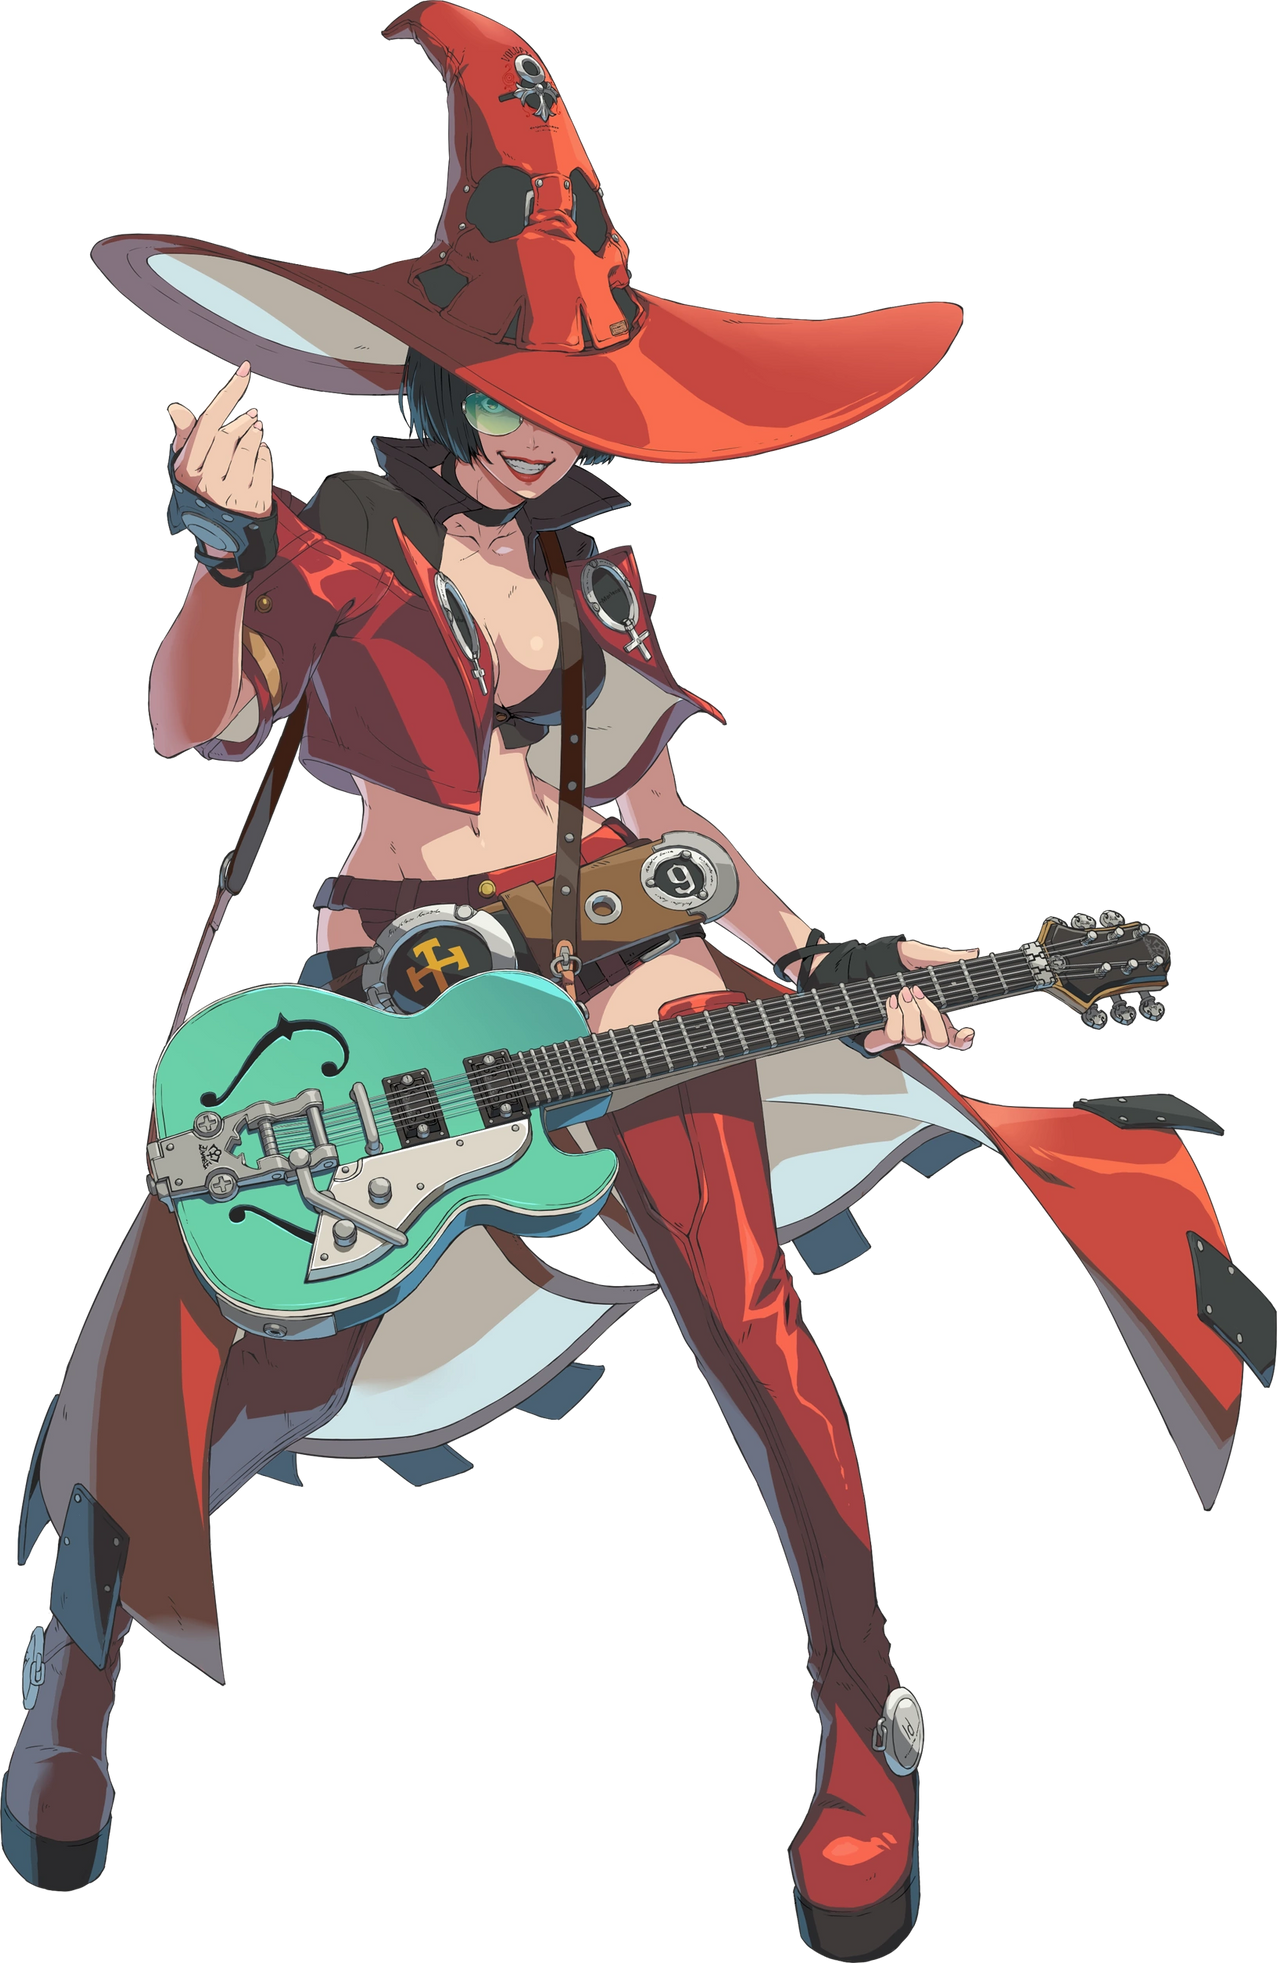 I can't stop thinking about Ky's legs : r/Guiltygear